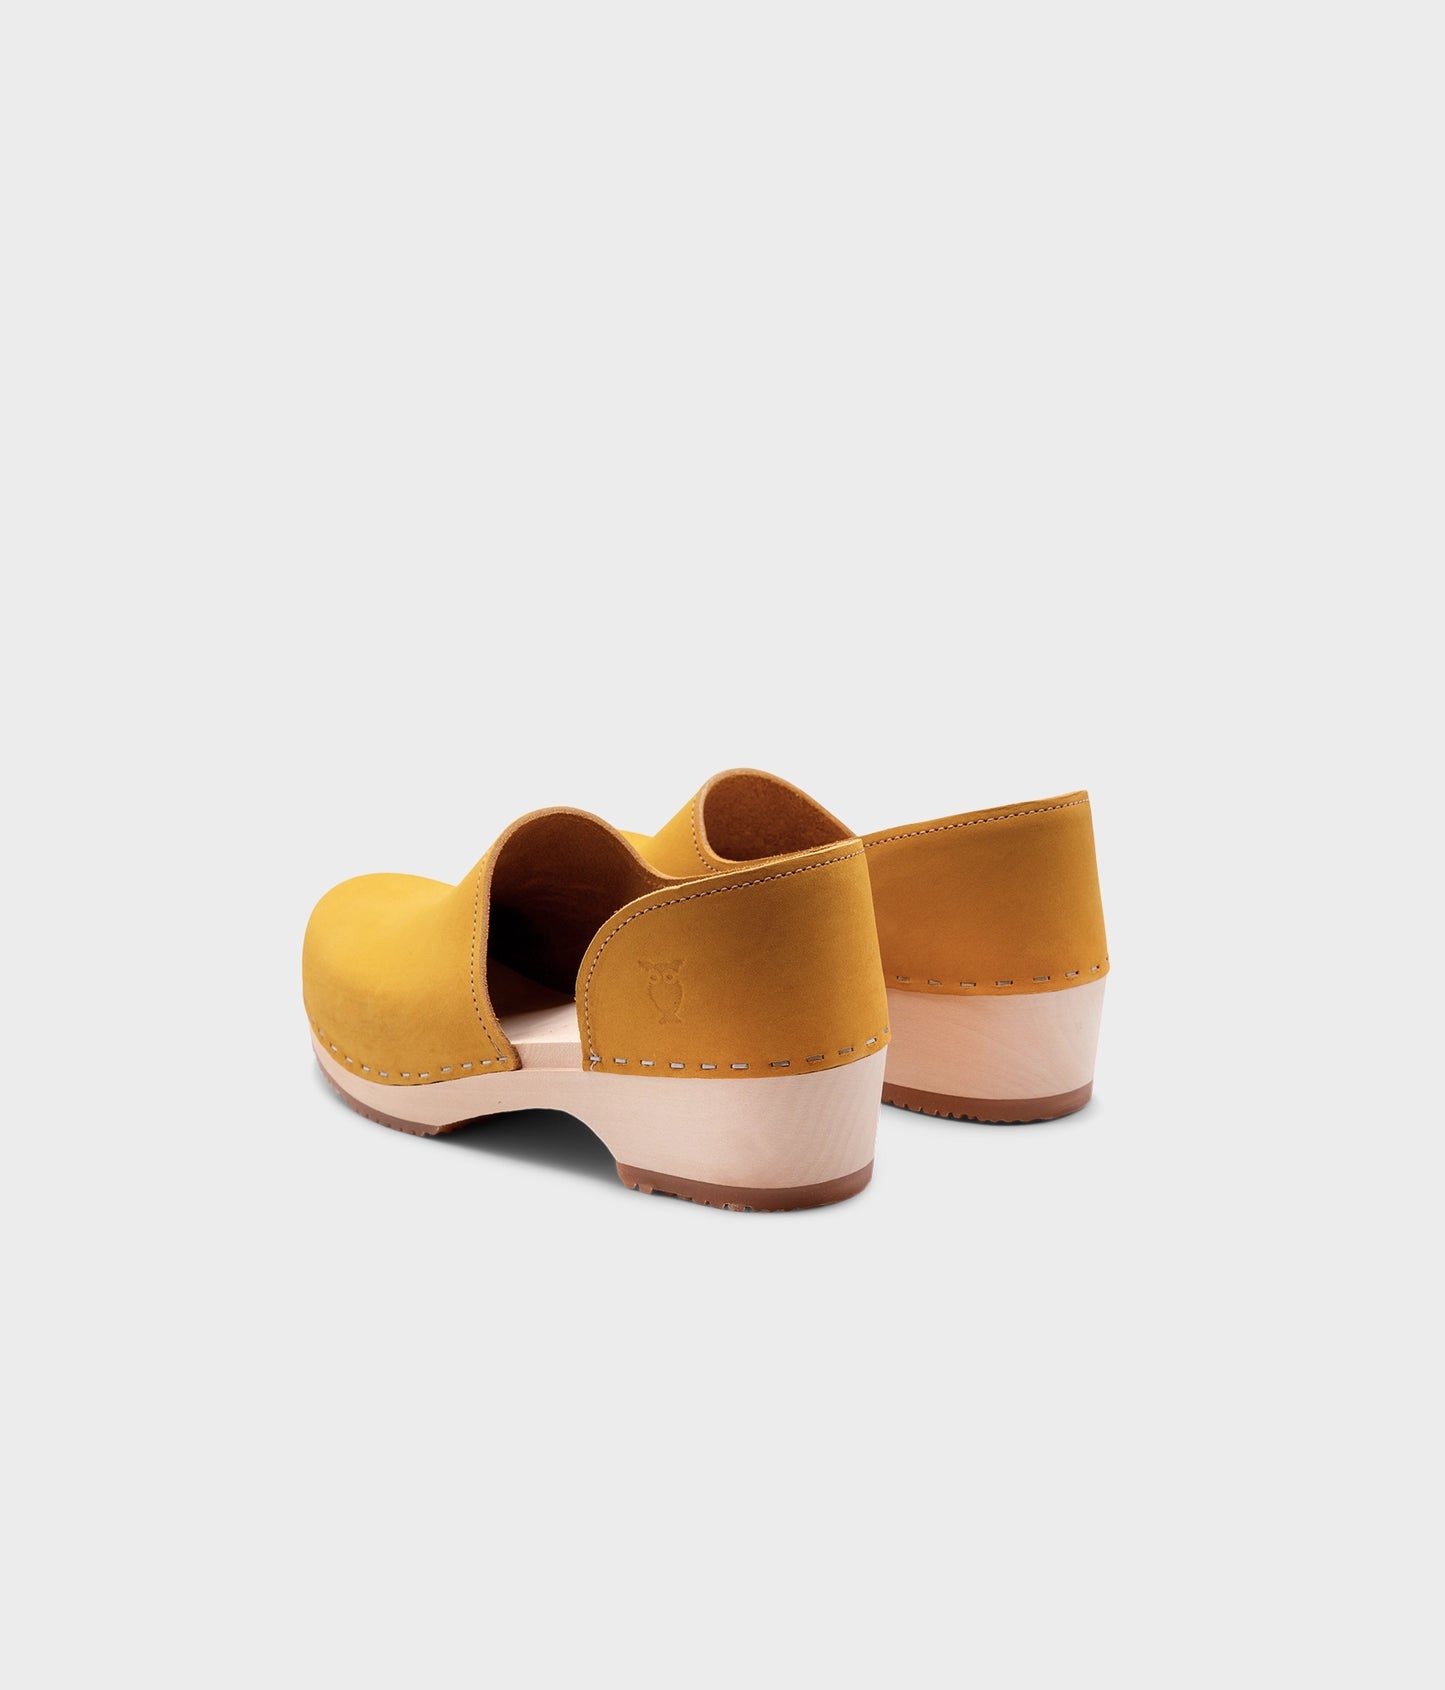 low heeled closed-back clogs in yellow nubuck leather stapled on a light wooden base